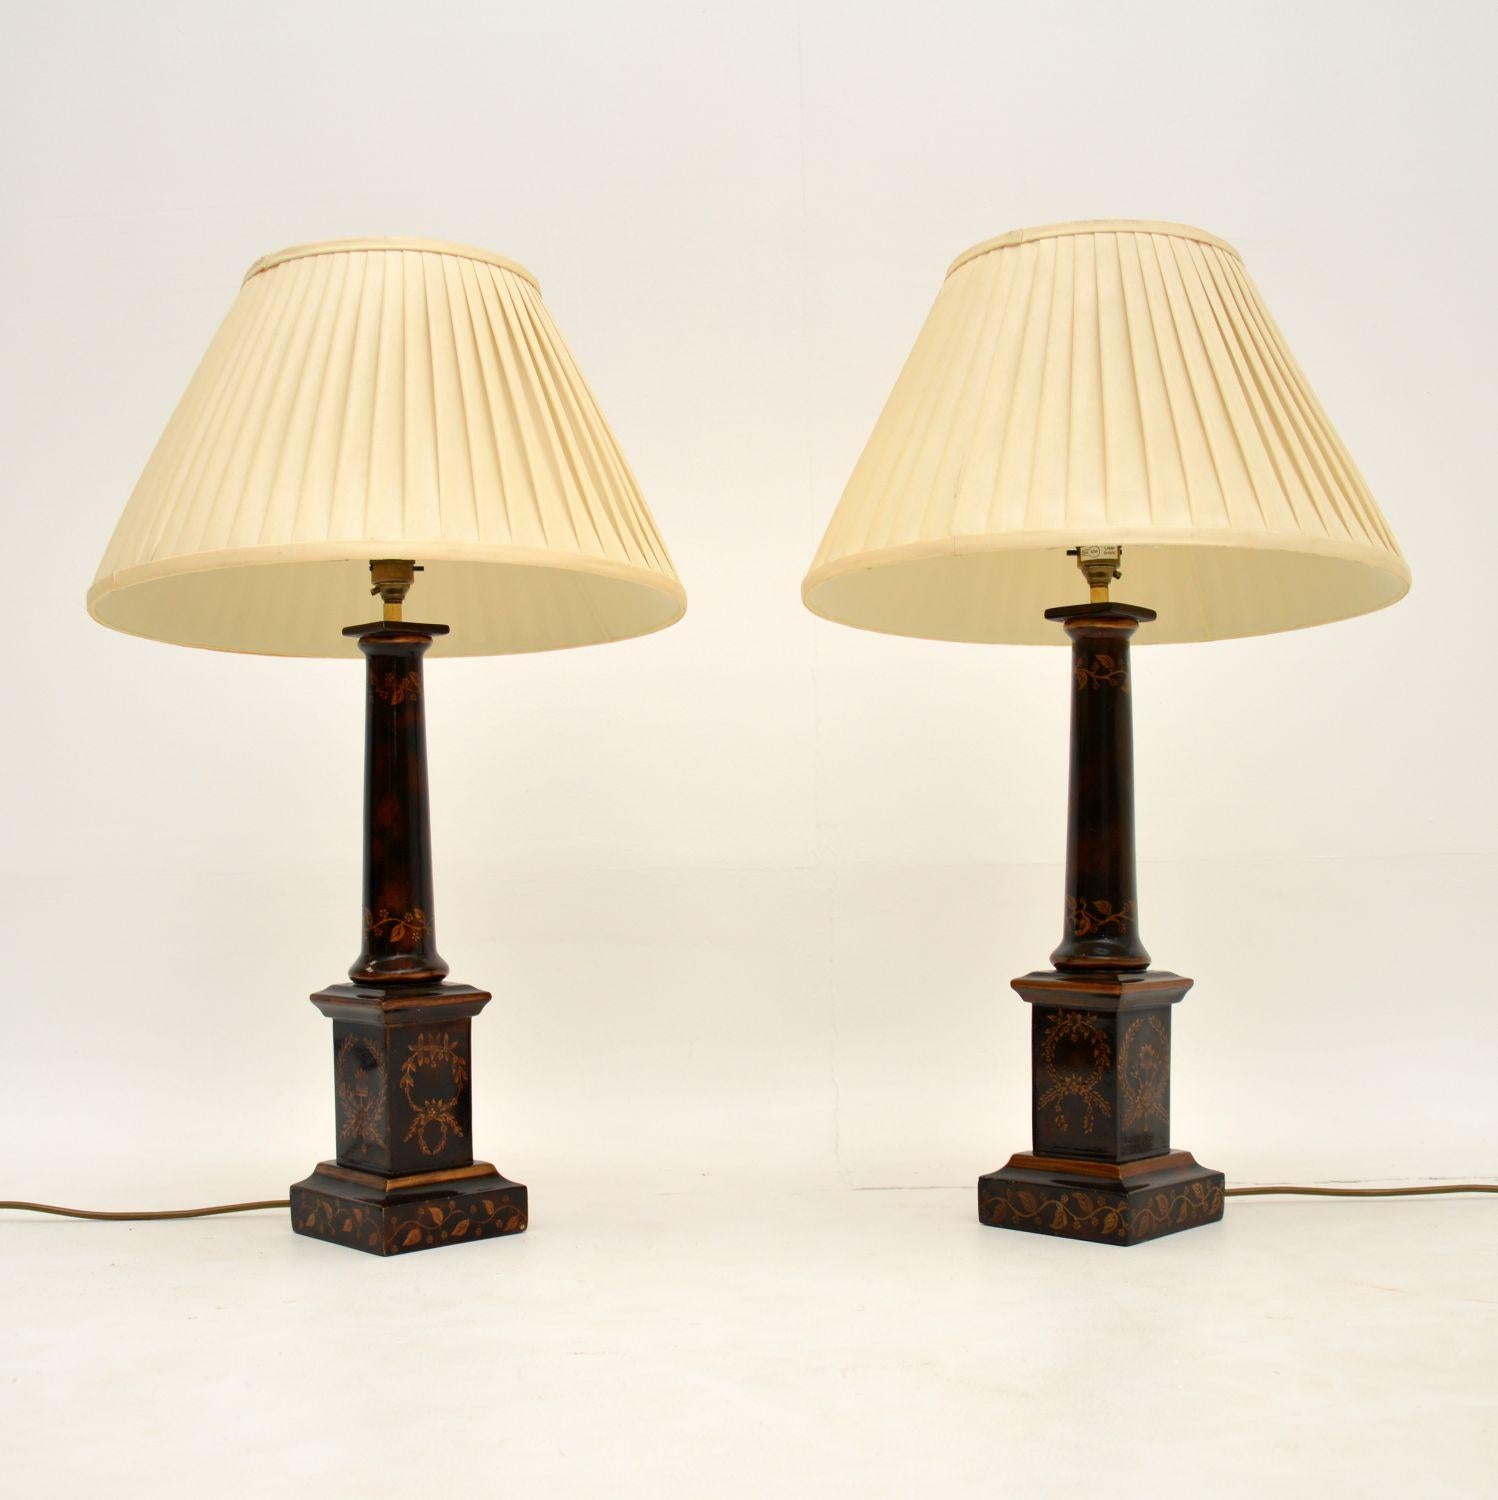 A stunning pair of vintage table lamps in the antique neoclassical style. These were made in England, they date from around the 1960’s.

The quality is excellent, they are finished in a beautiful painted design and have a gorgeous colour.

The